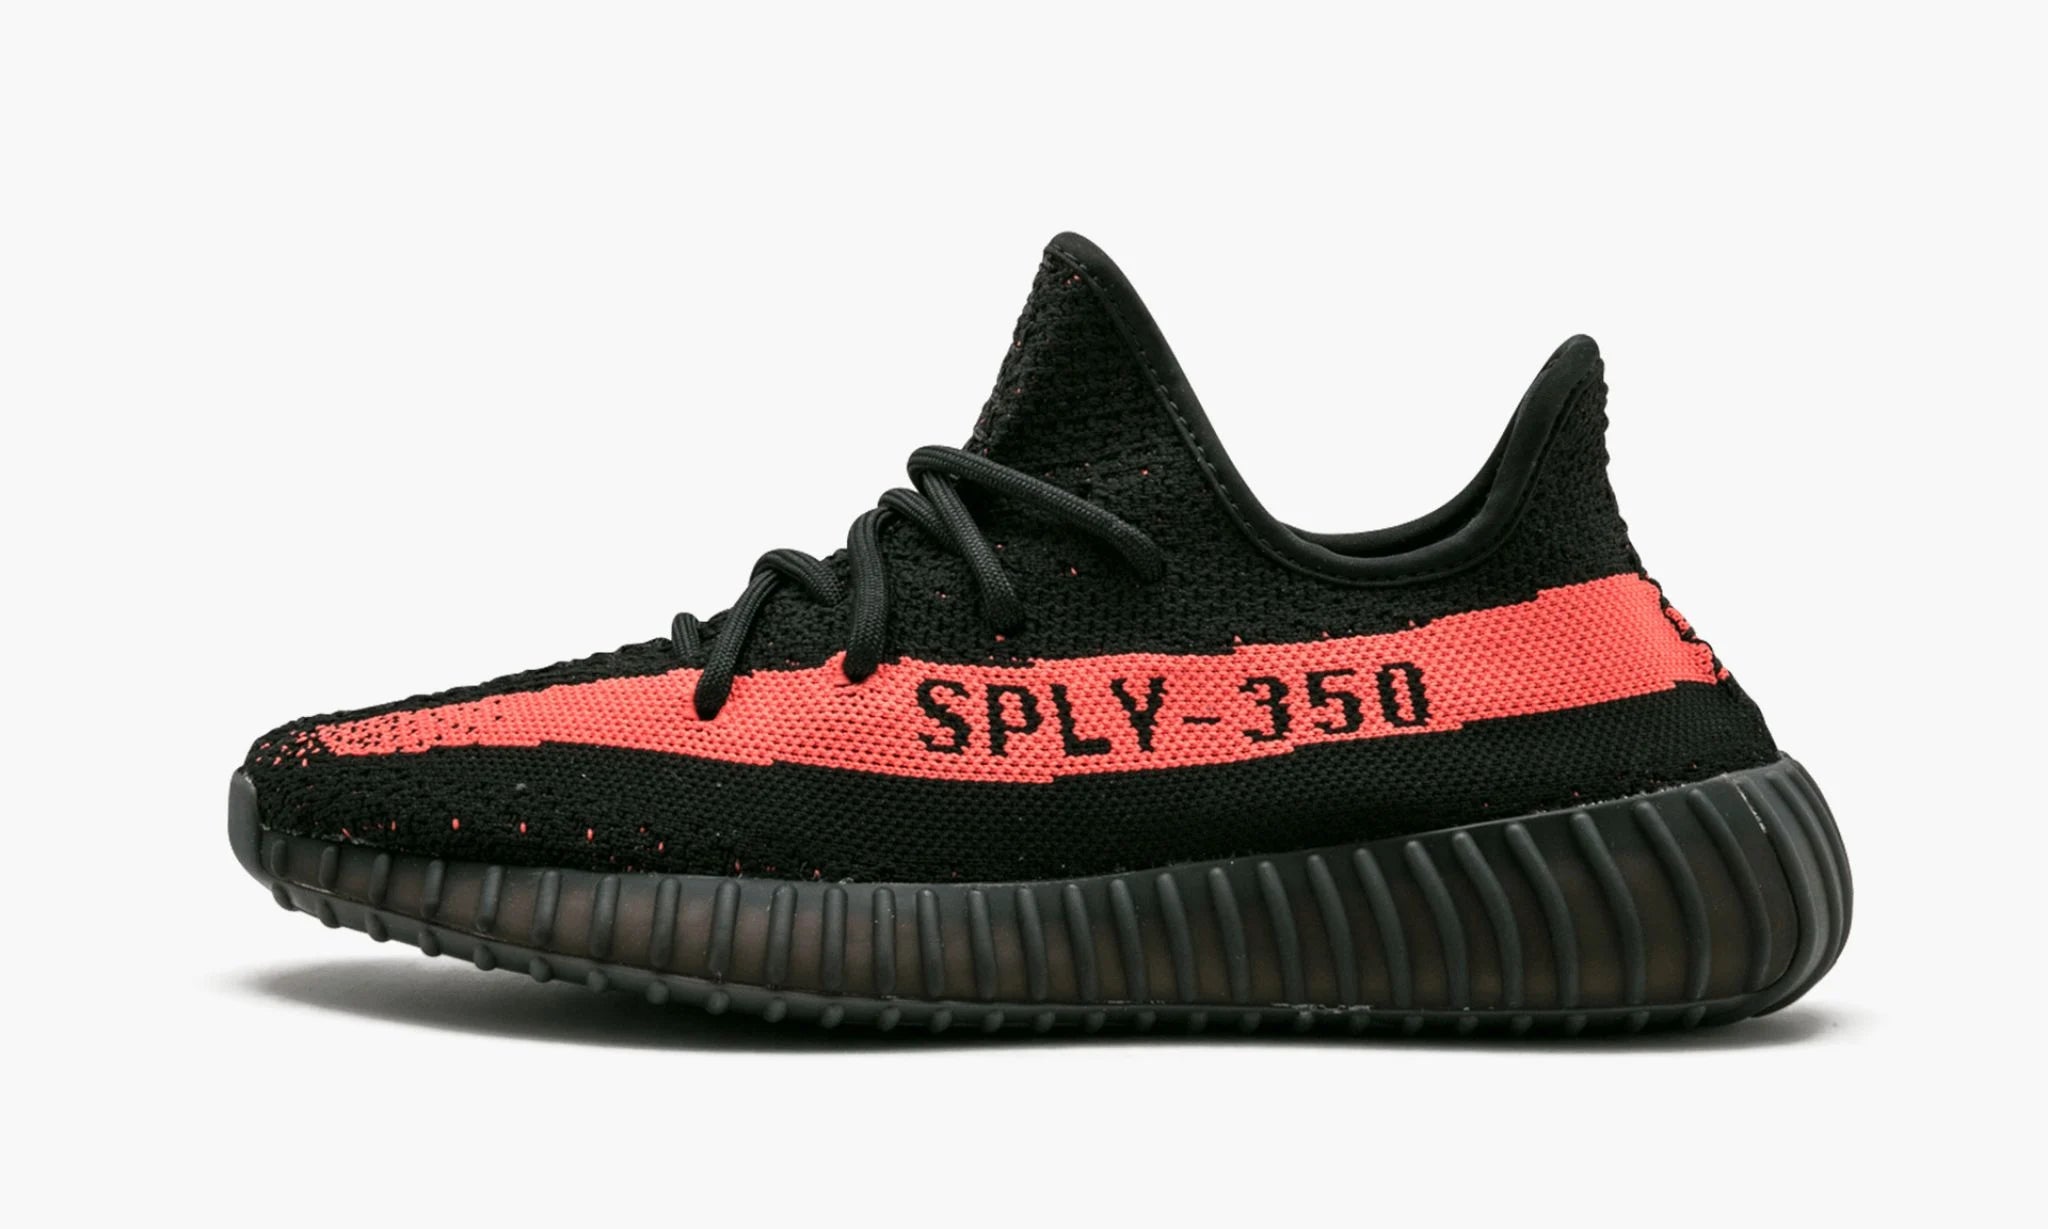 adidas YEEZY Boost 350 V2/Core Black/Red